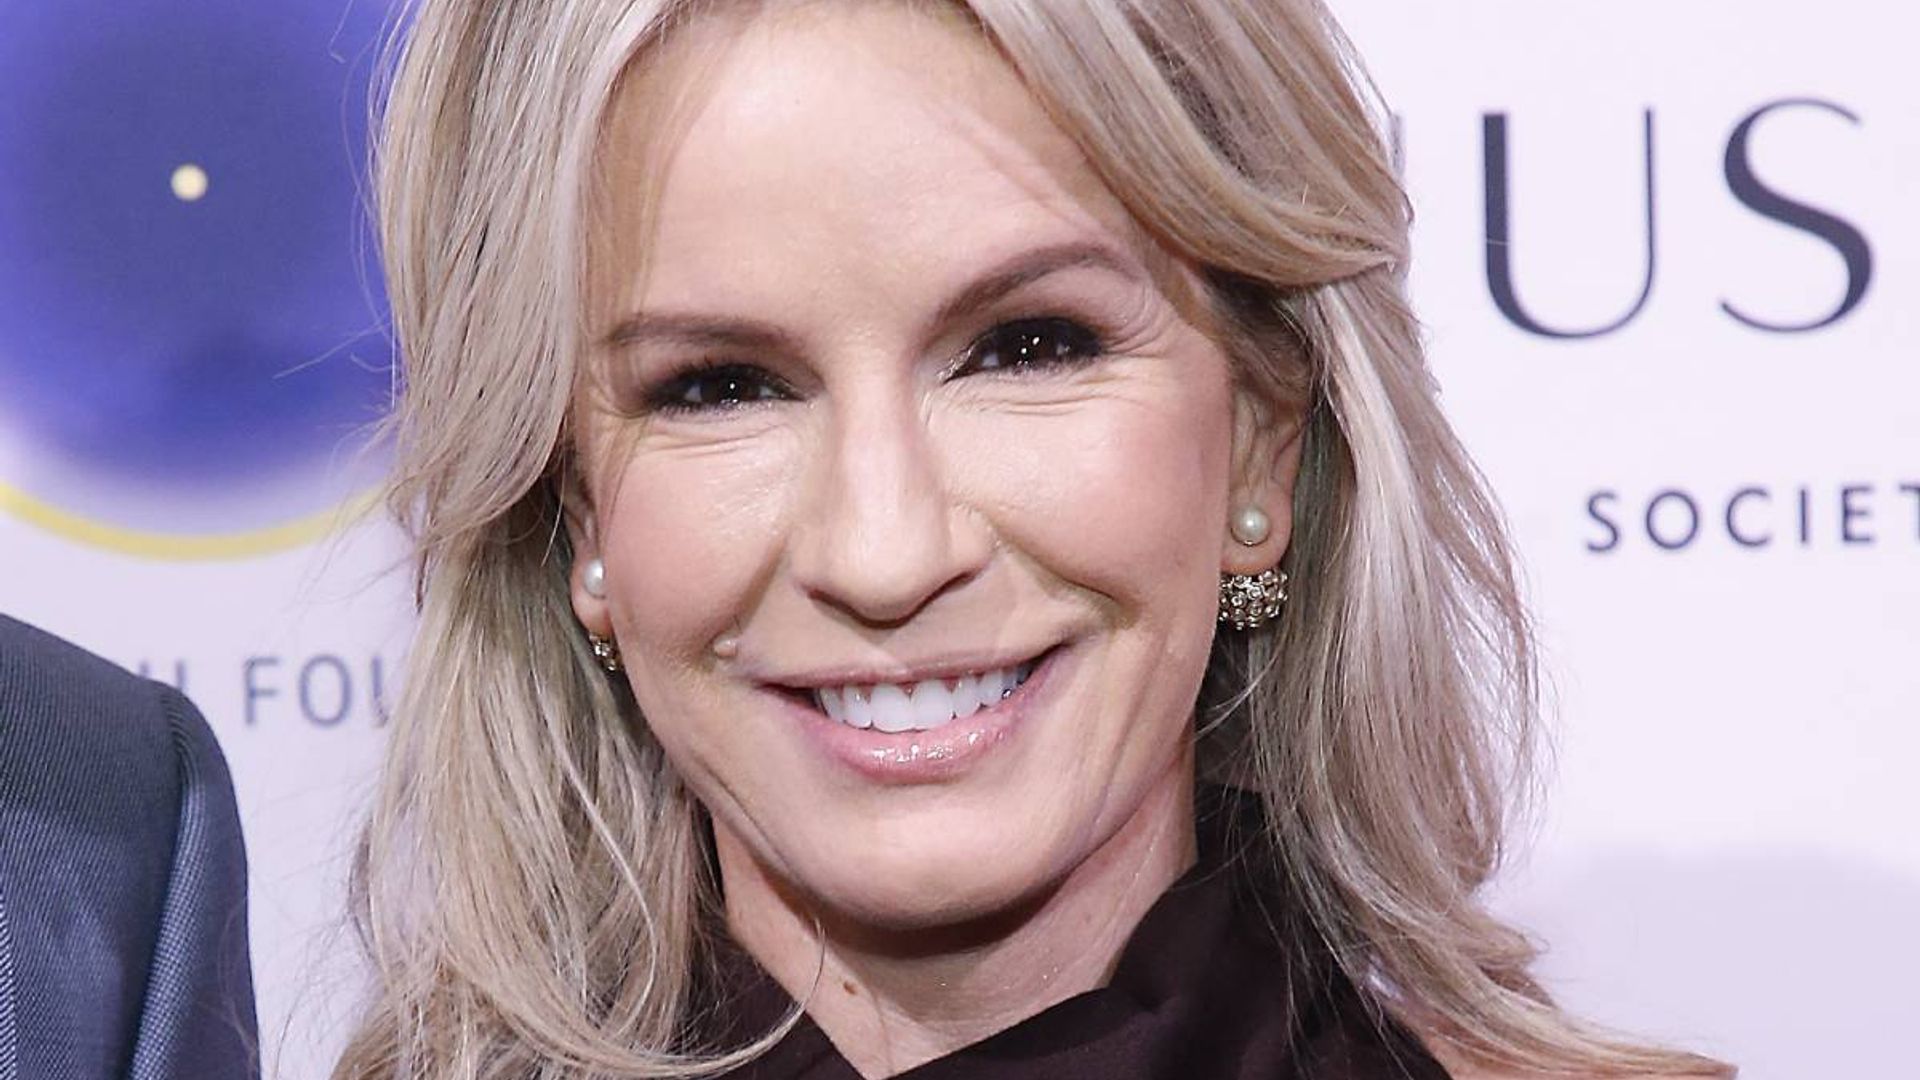 Dr. Jennifer Ashton teases 'exciting things around the corner' - leaving fans intrigued